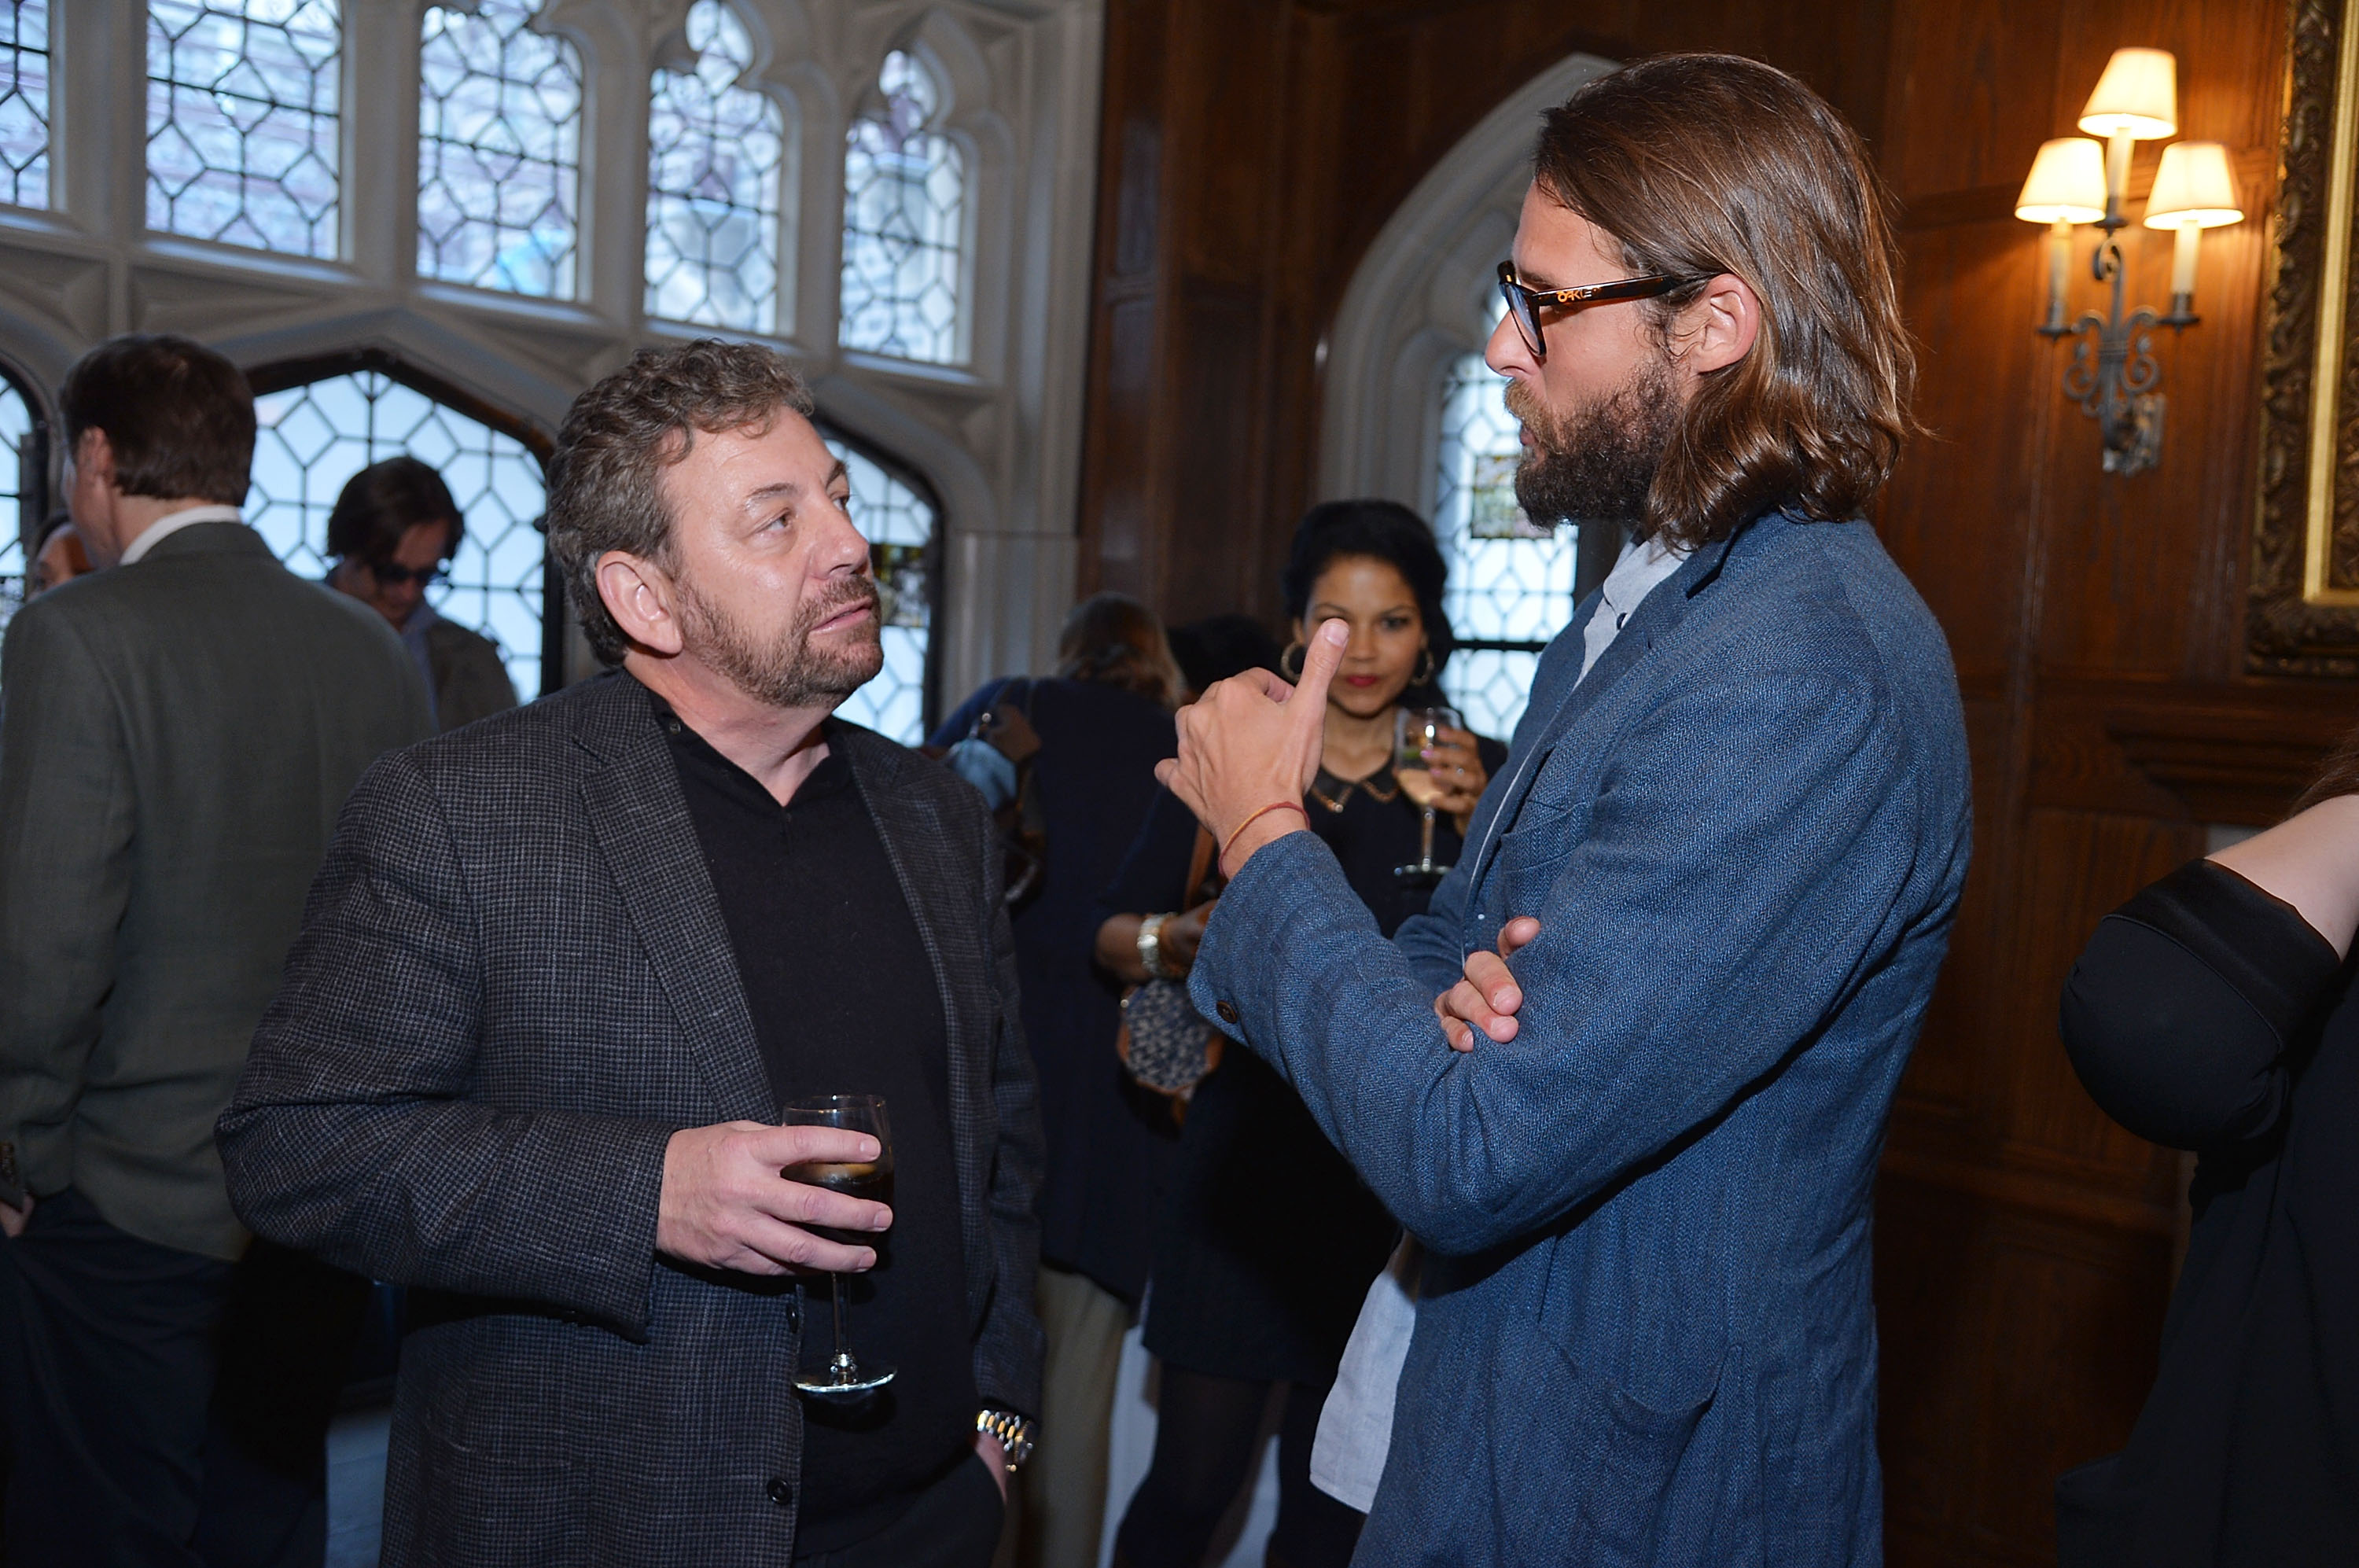 President and CEO of Cablevision Systems Corporation James Dolan and David de Rothschild in New York in 2013